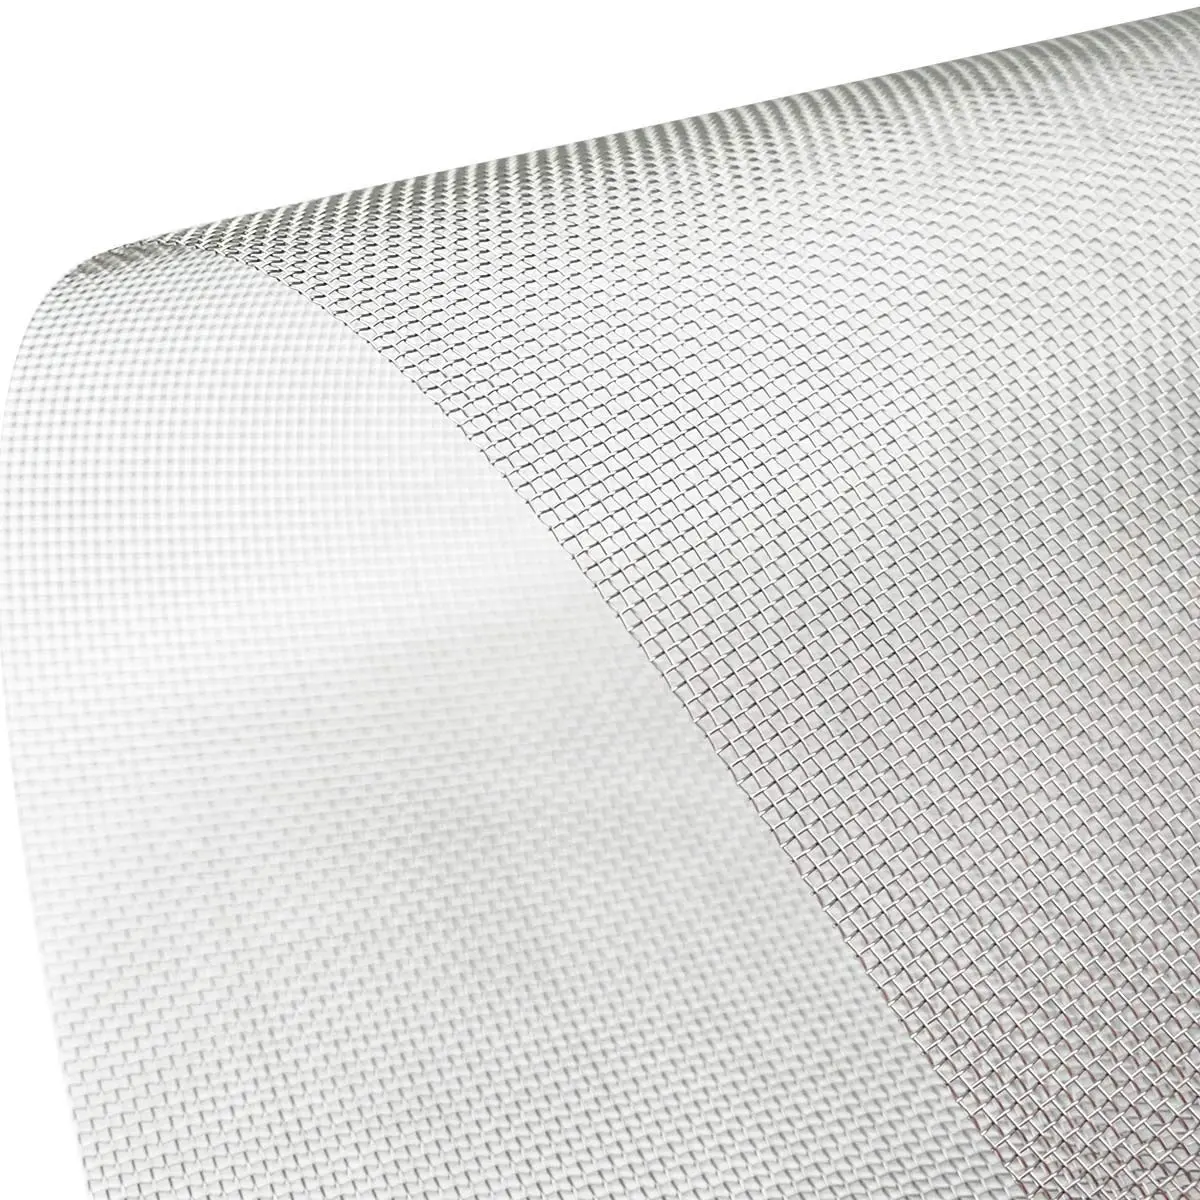 14x14 mesh mosquito insect aluminum alloy wire netting